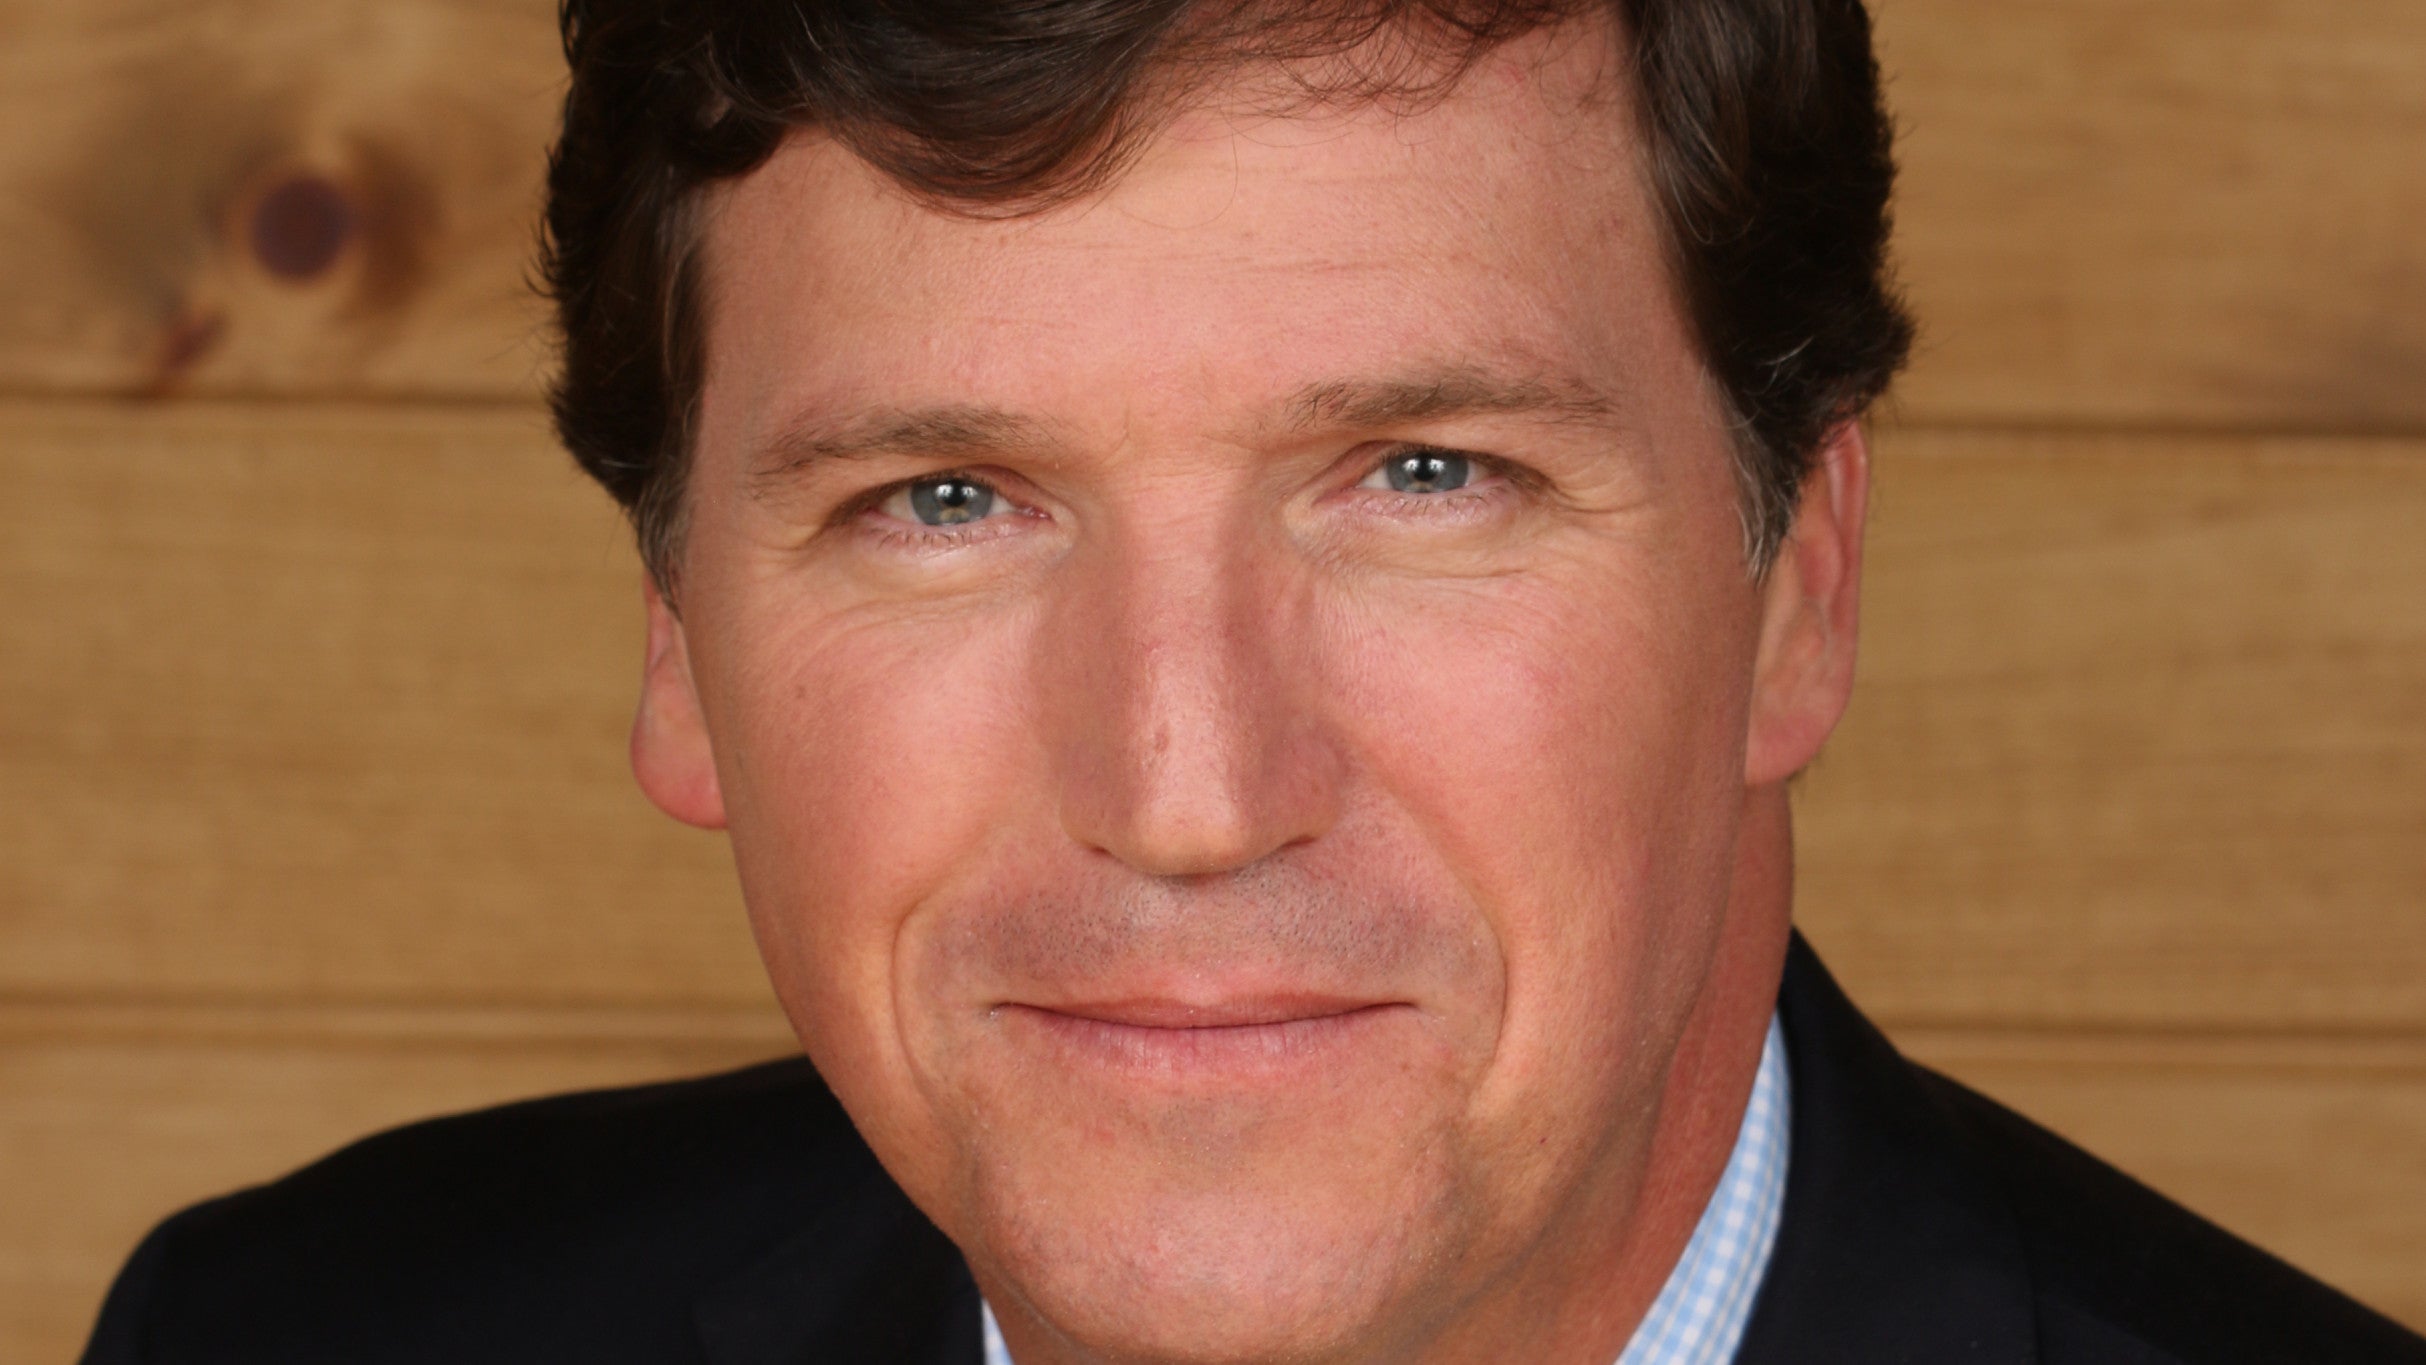 Tucker Carlson Live in Baltimore promo photo for Exclusive presale offer code